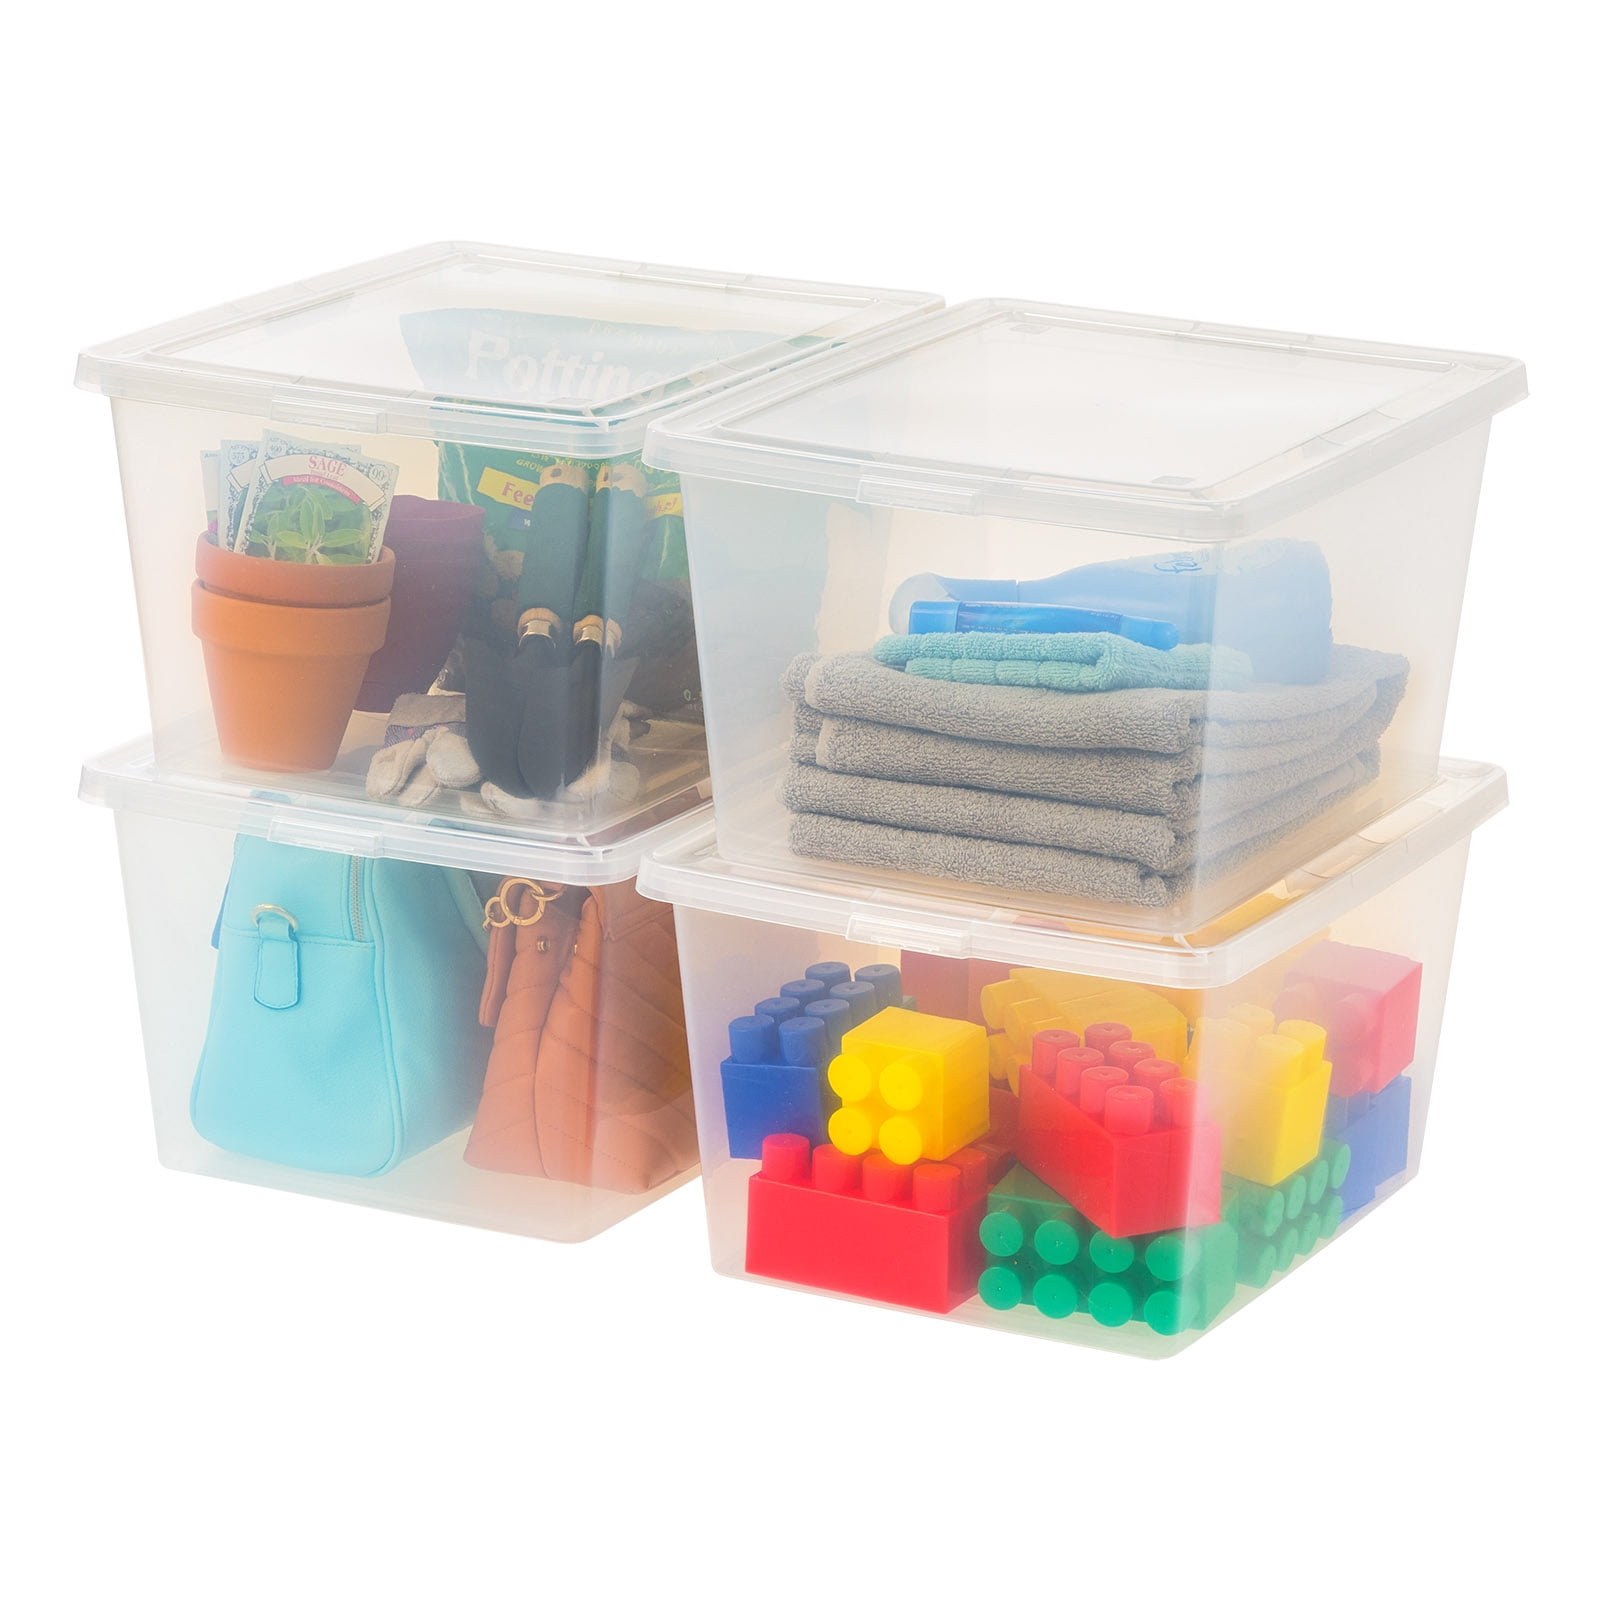 Parliky 5pcs Boxes Storage Bins with Lids Tote Bags Storage Boxes Plastic  Bins for Storage Plastic Storage Containers Plastic Containers with Lids  for